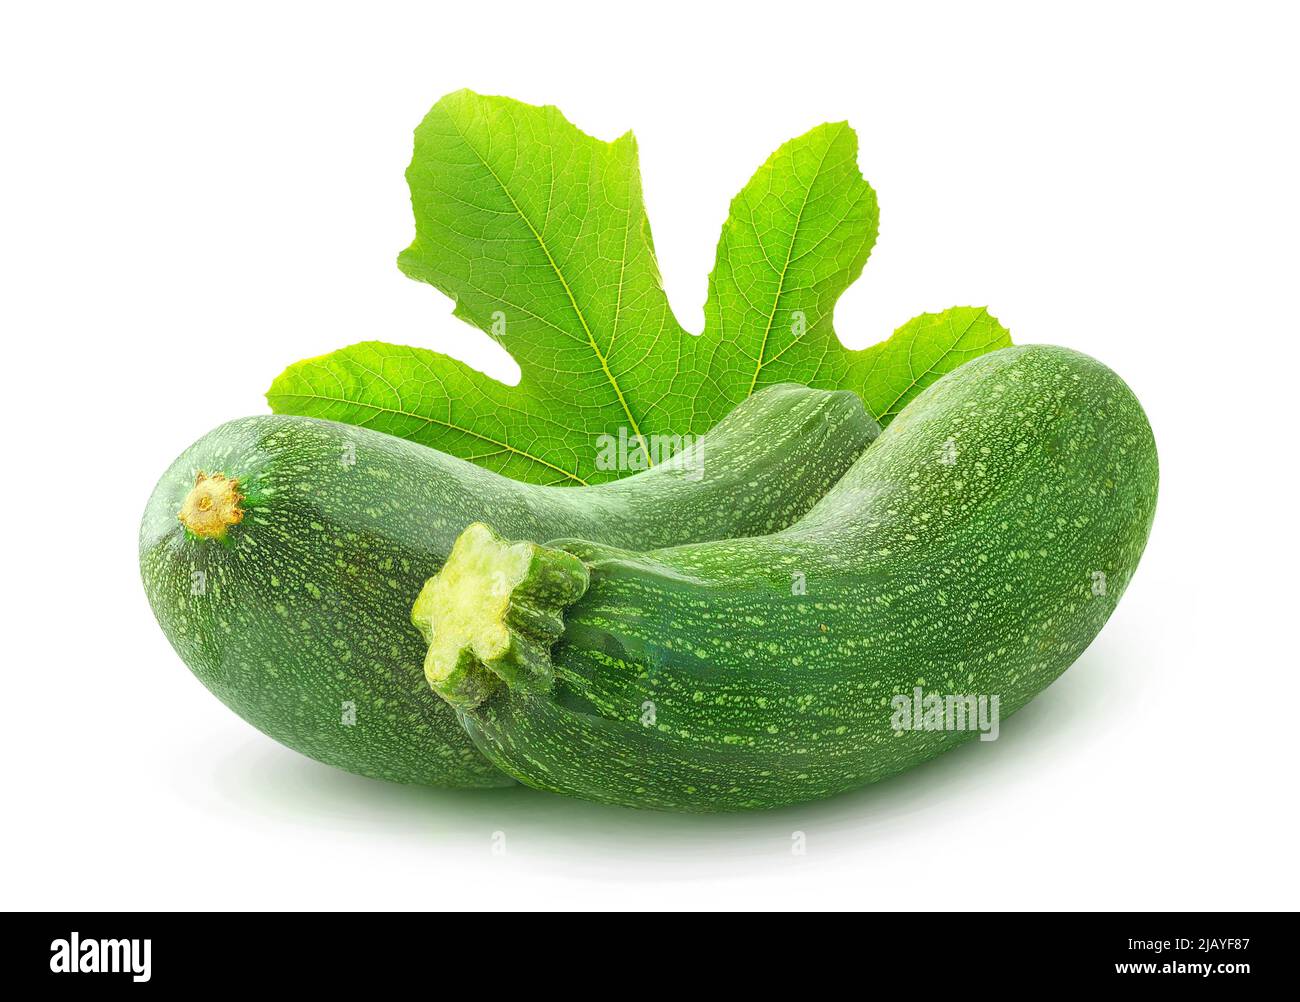 Two zucchini with leaf isolated on white background Stock Photo